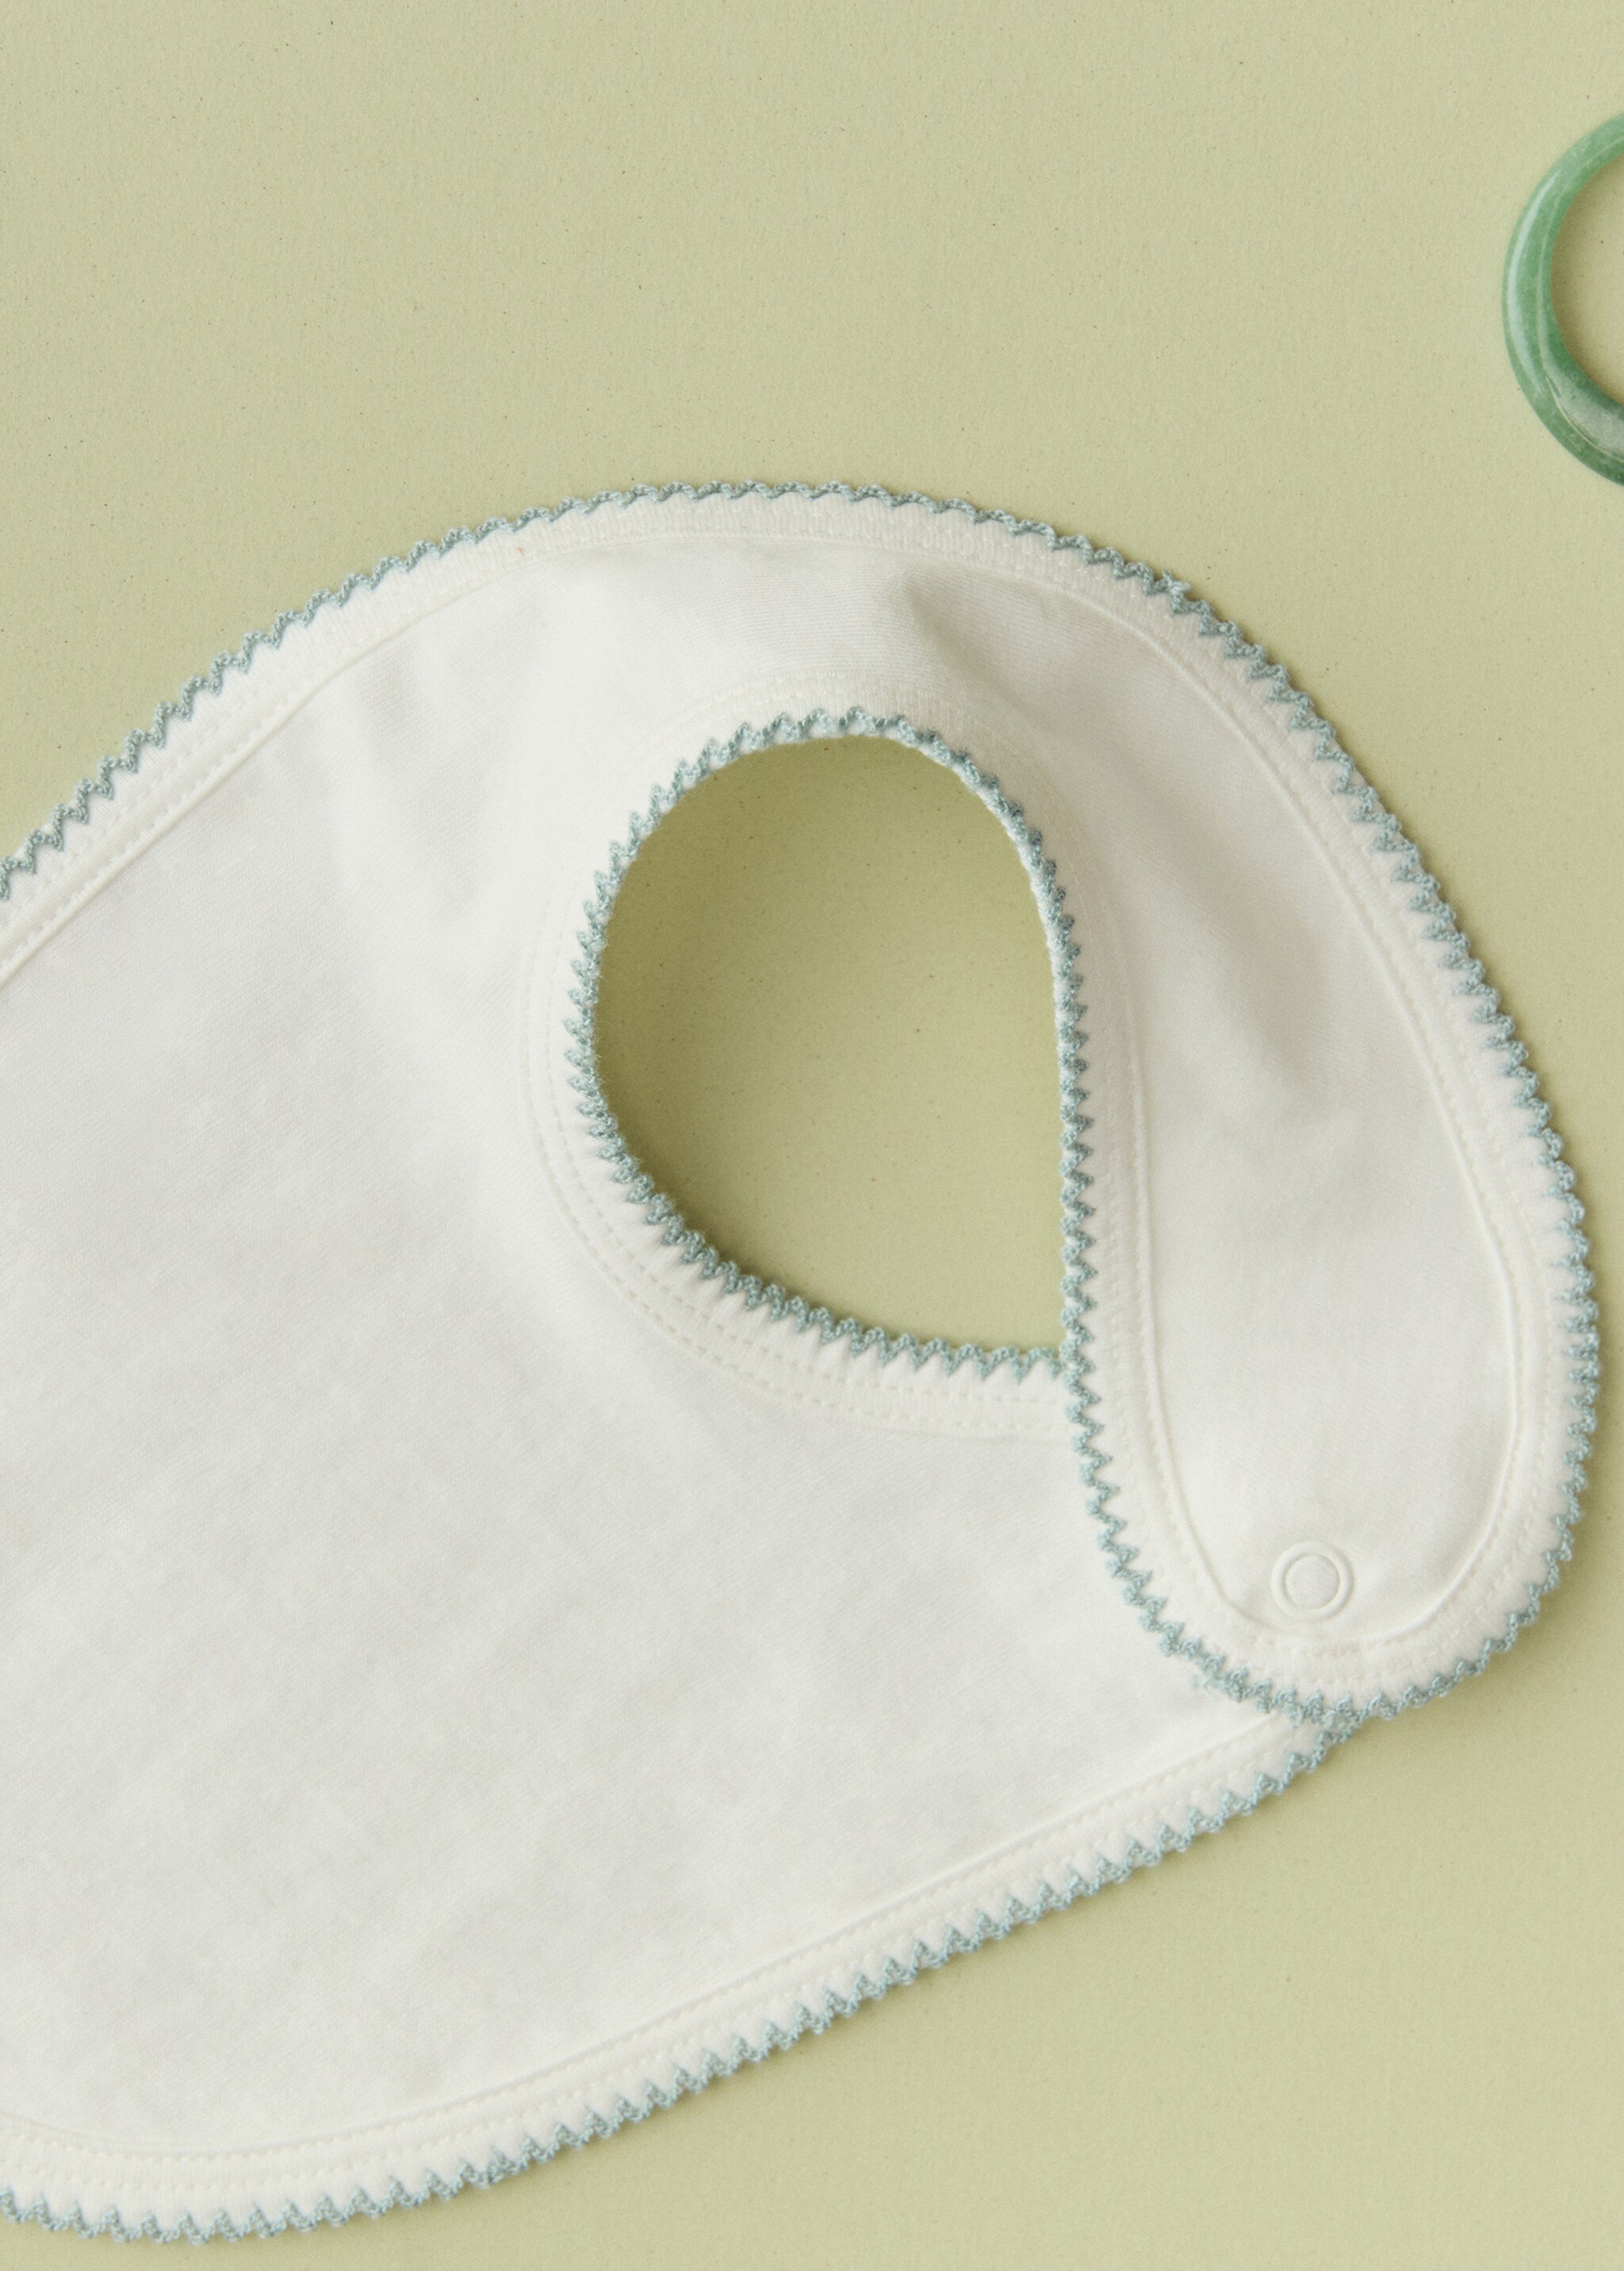 Pack of 2 cotton bibs   - General plane